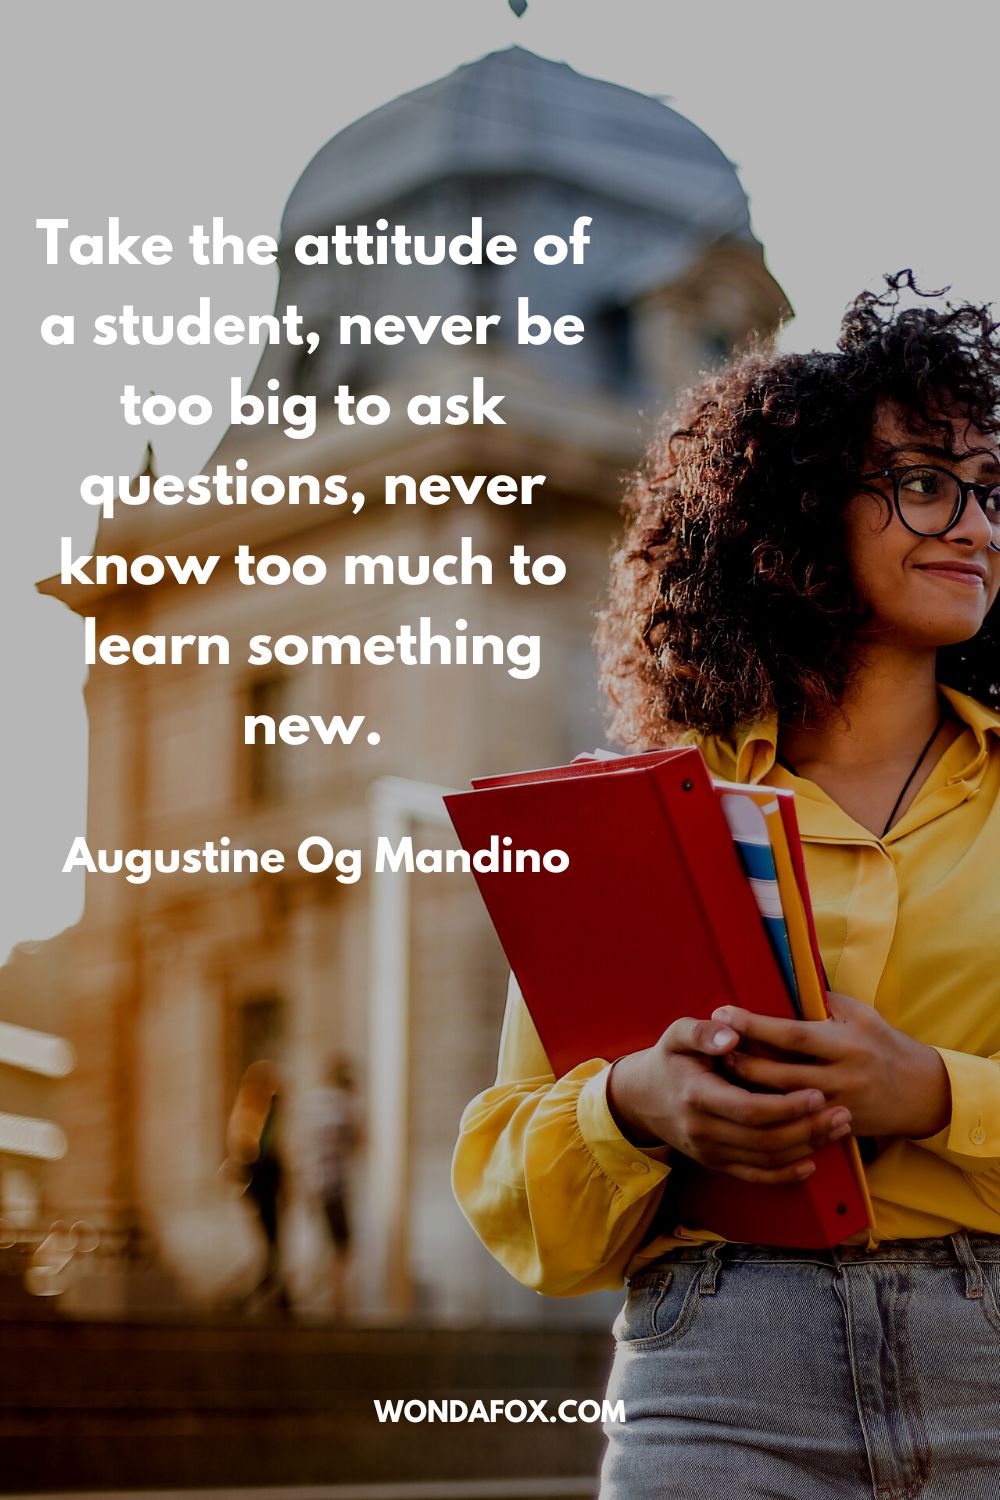 Take the attitude of a student, never be too big to ask questions, never know too much to learn something new. Augustine Og Mandino